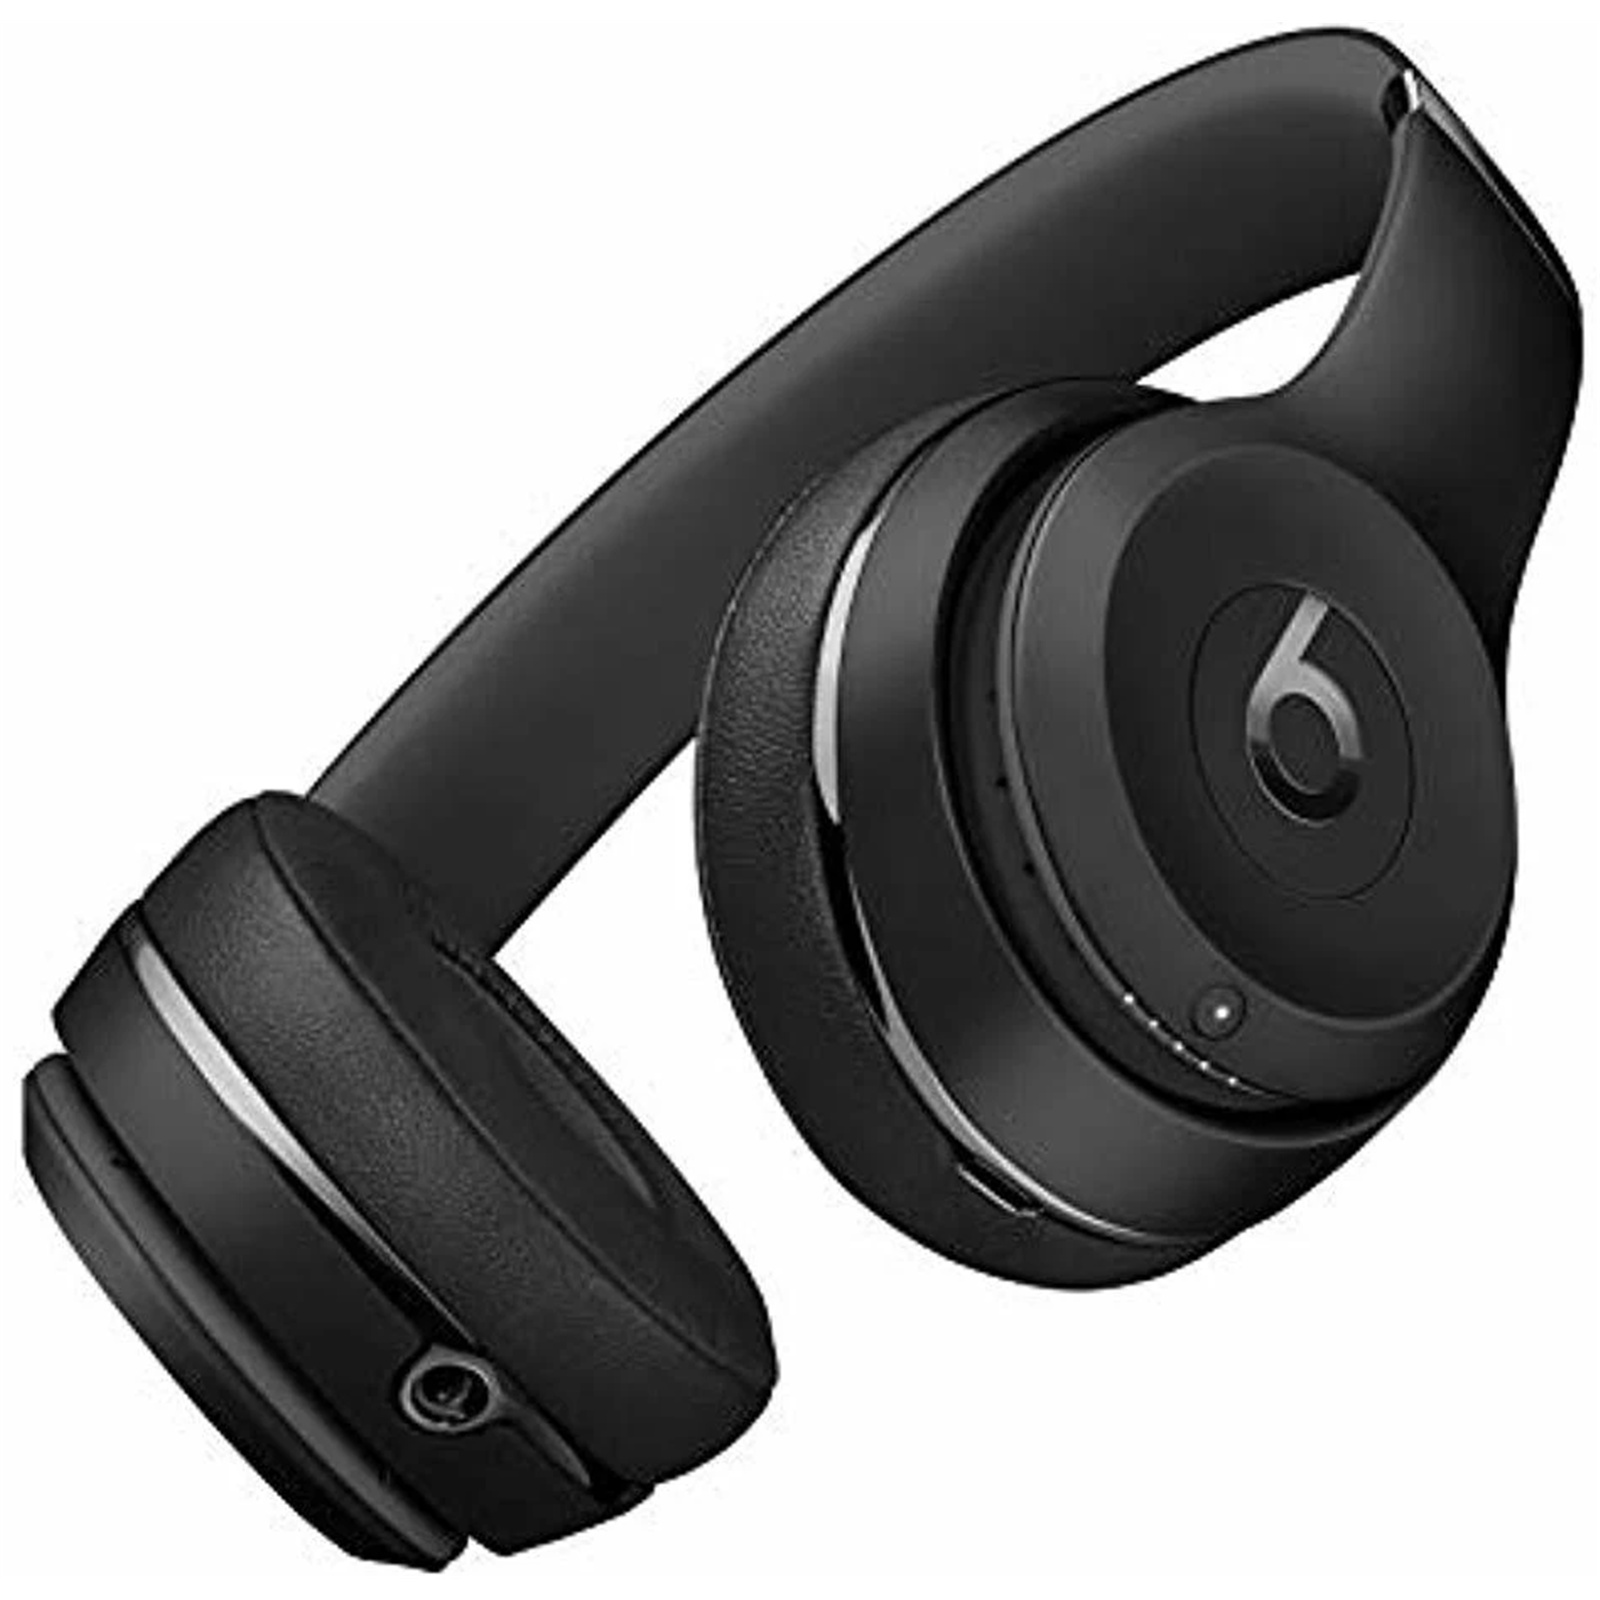 Buy the Beats Solo3 Wireless On-Ear Headphones - Black Up to 40 Hours of...  ( ) online - PBTech.com/pacific